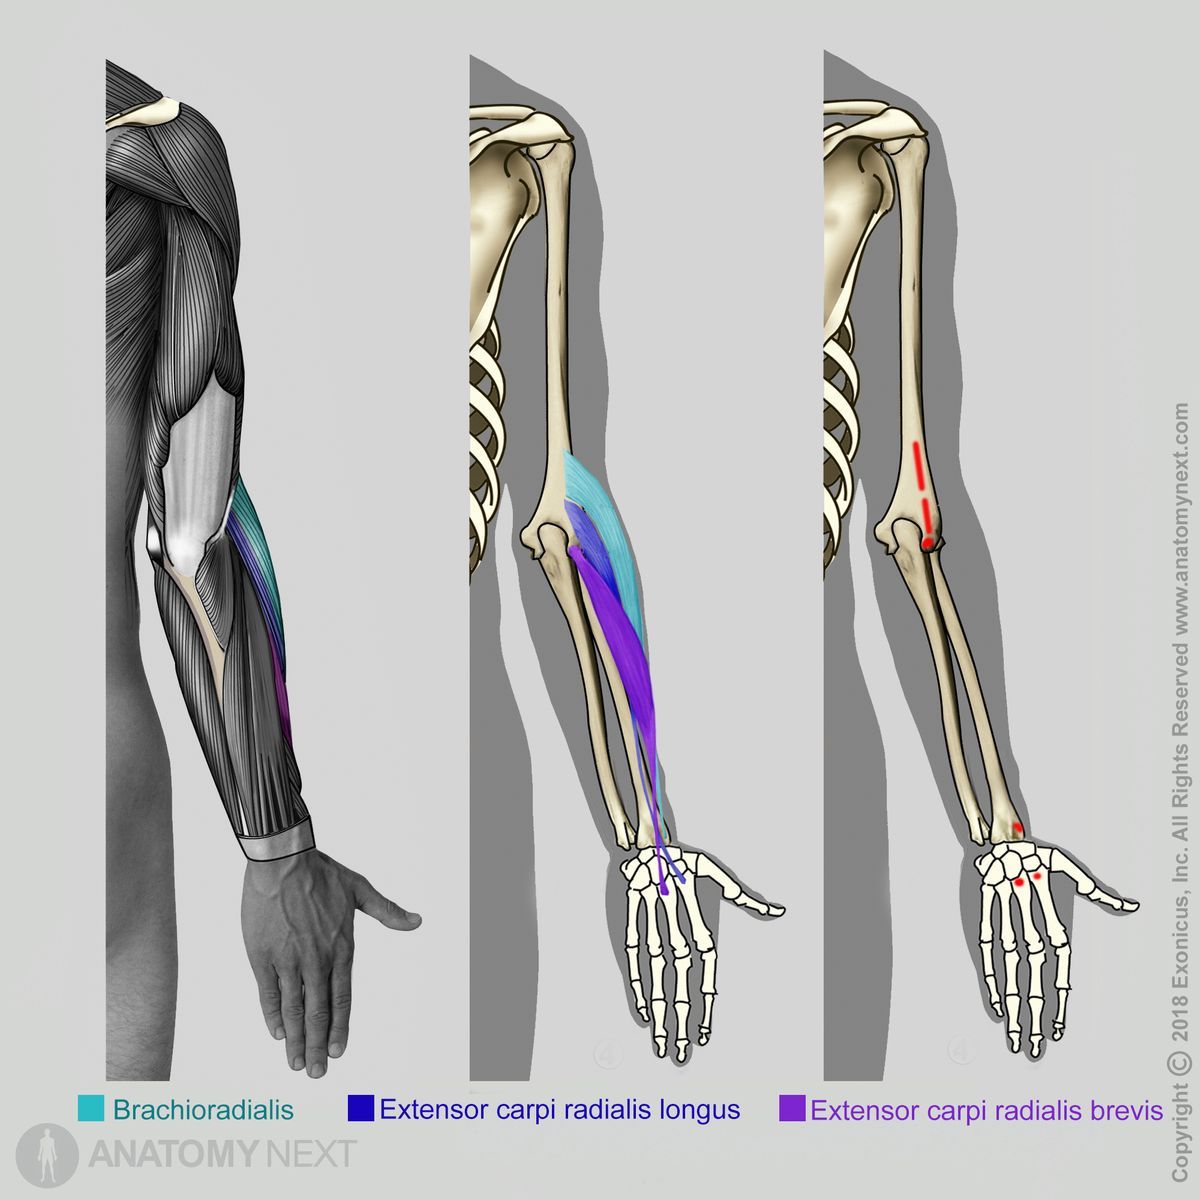 Brachioradialis, Extensor carpi radialis longus, Extensor carpi radialis brevis, Origin of brachioradialis, Origin of extensor carpi radialis longus, Origin of extensor carpi radialis brevis, Forearm muscles, Muscles of the forearm, Lateral compartment of forearm muscles, Lateral compartment muscles, Muscles of the upper limb, Arm muscles, Human muscles